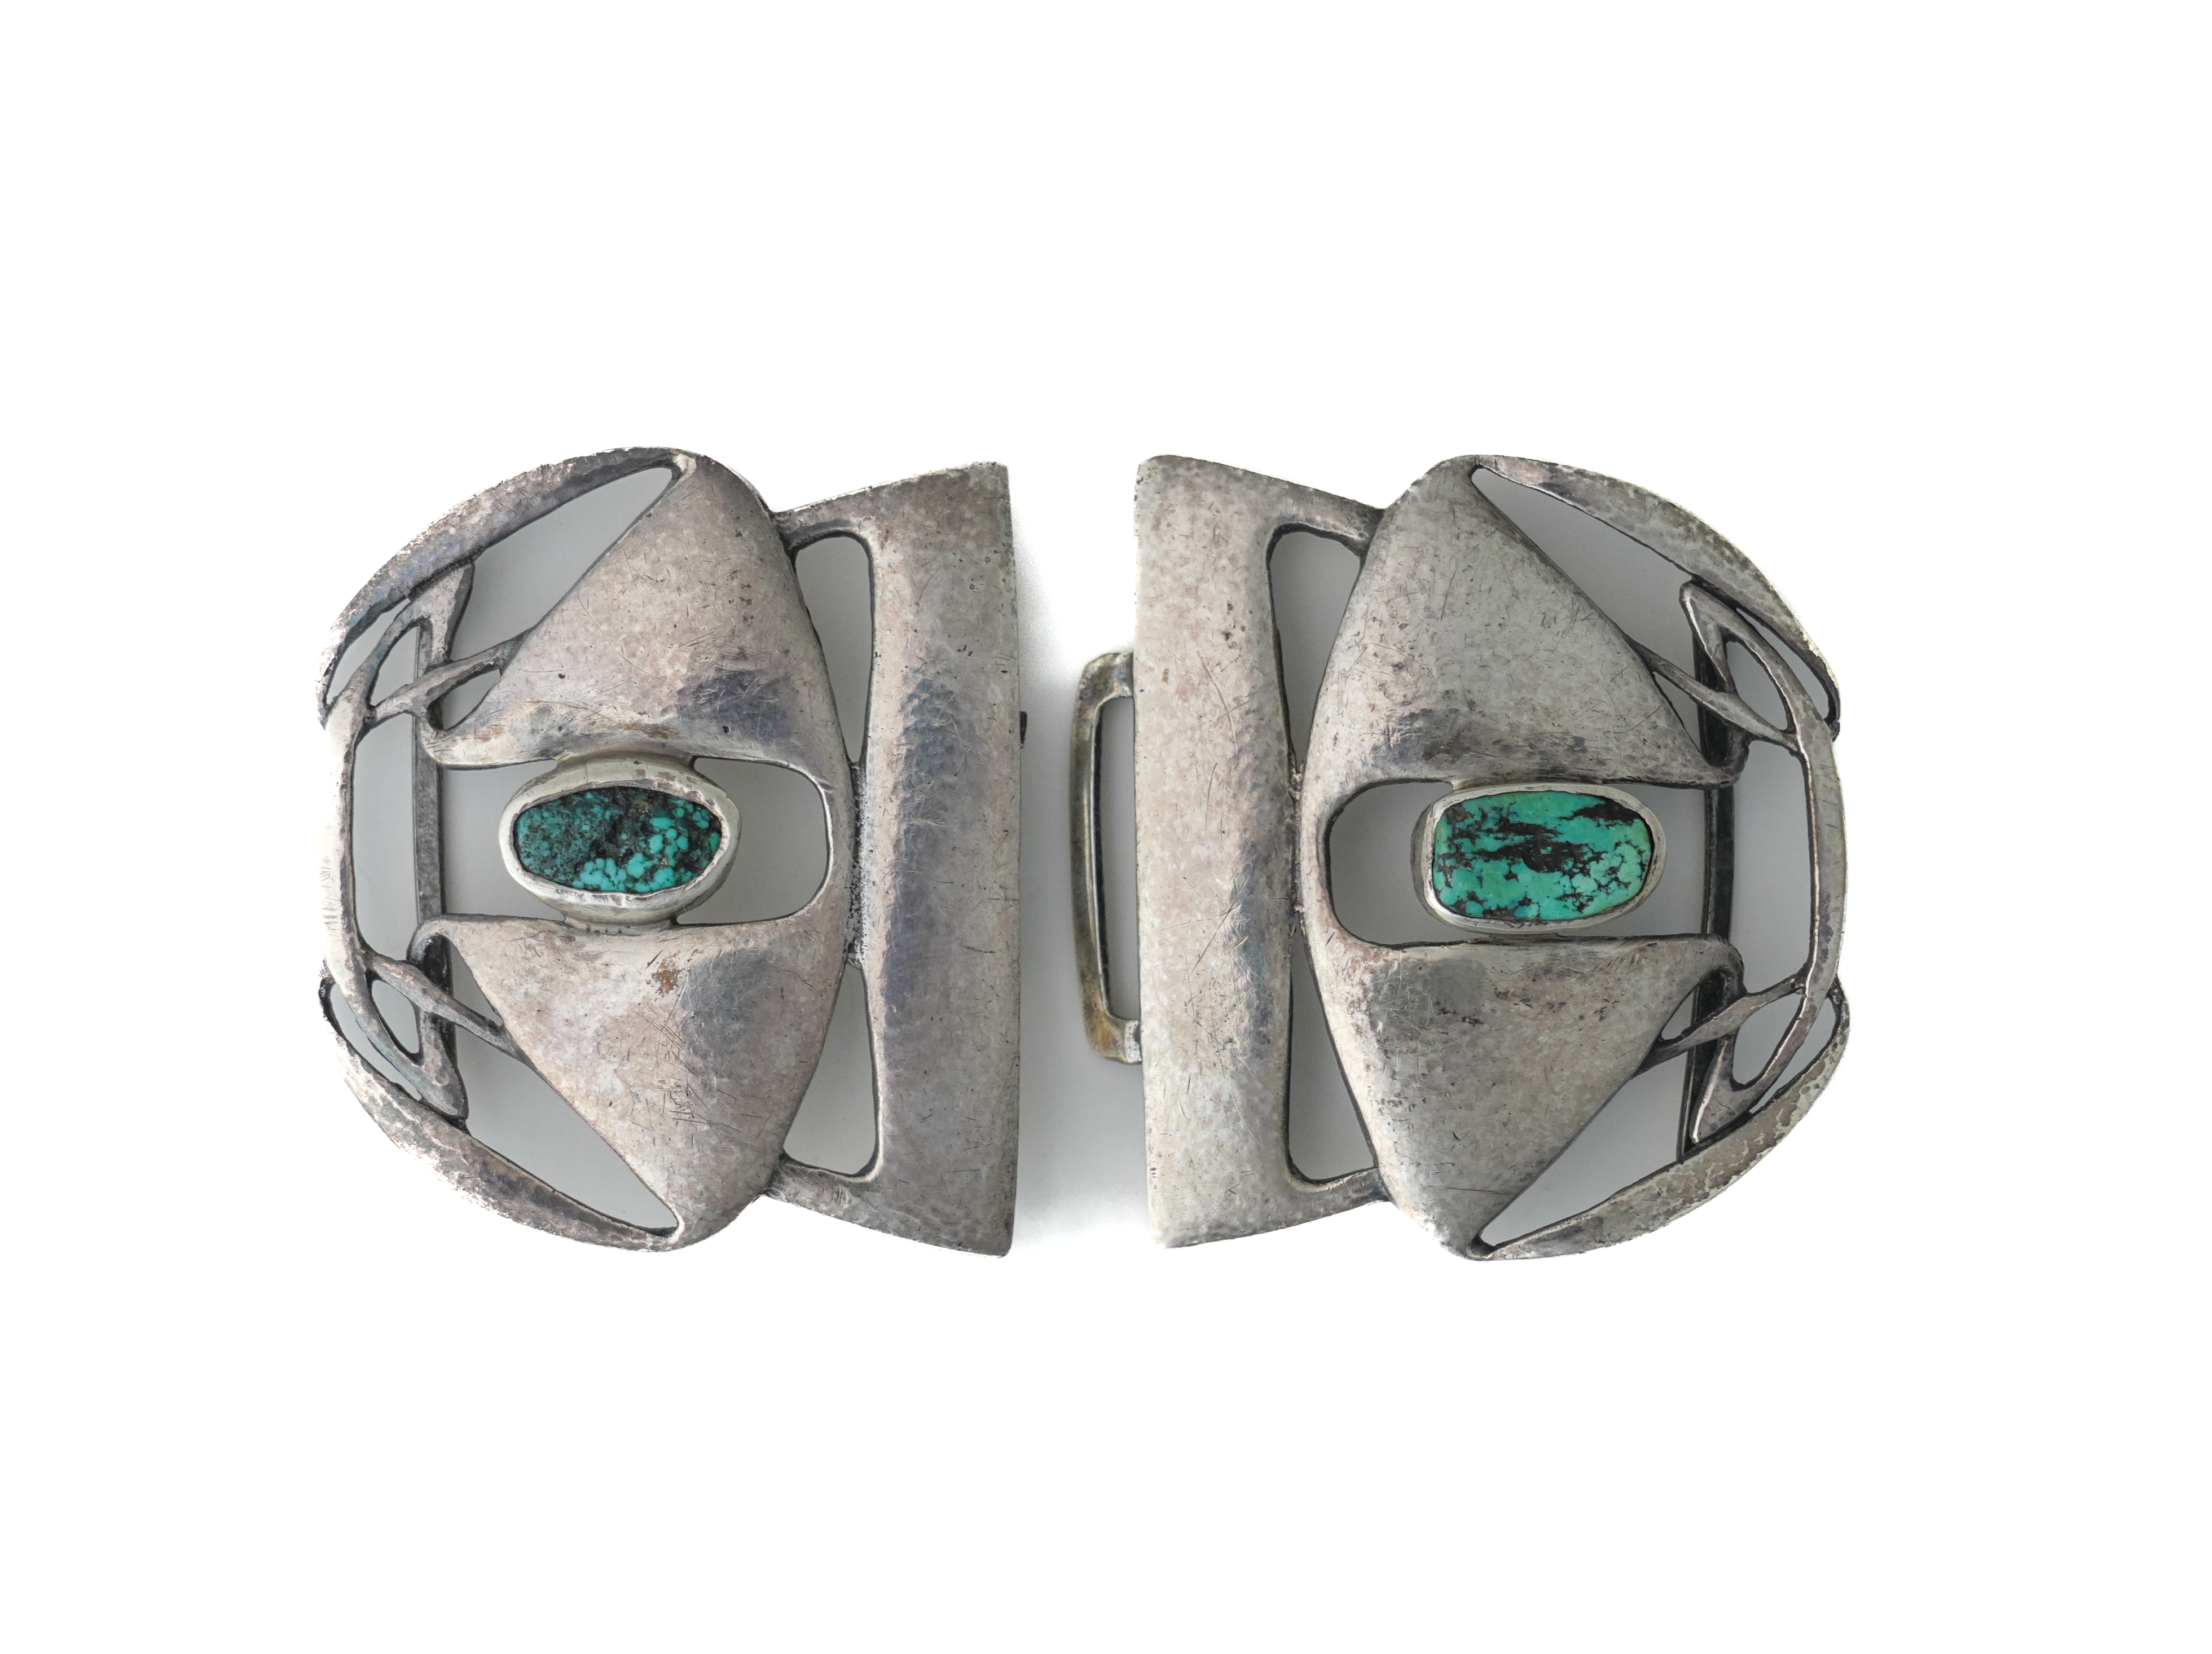 A LIBERTY AND CO SILVER AND TURQUOISE MATRIX TWO PIECE WAISTBELT BUCKLE - Image 2 of 3